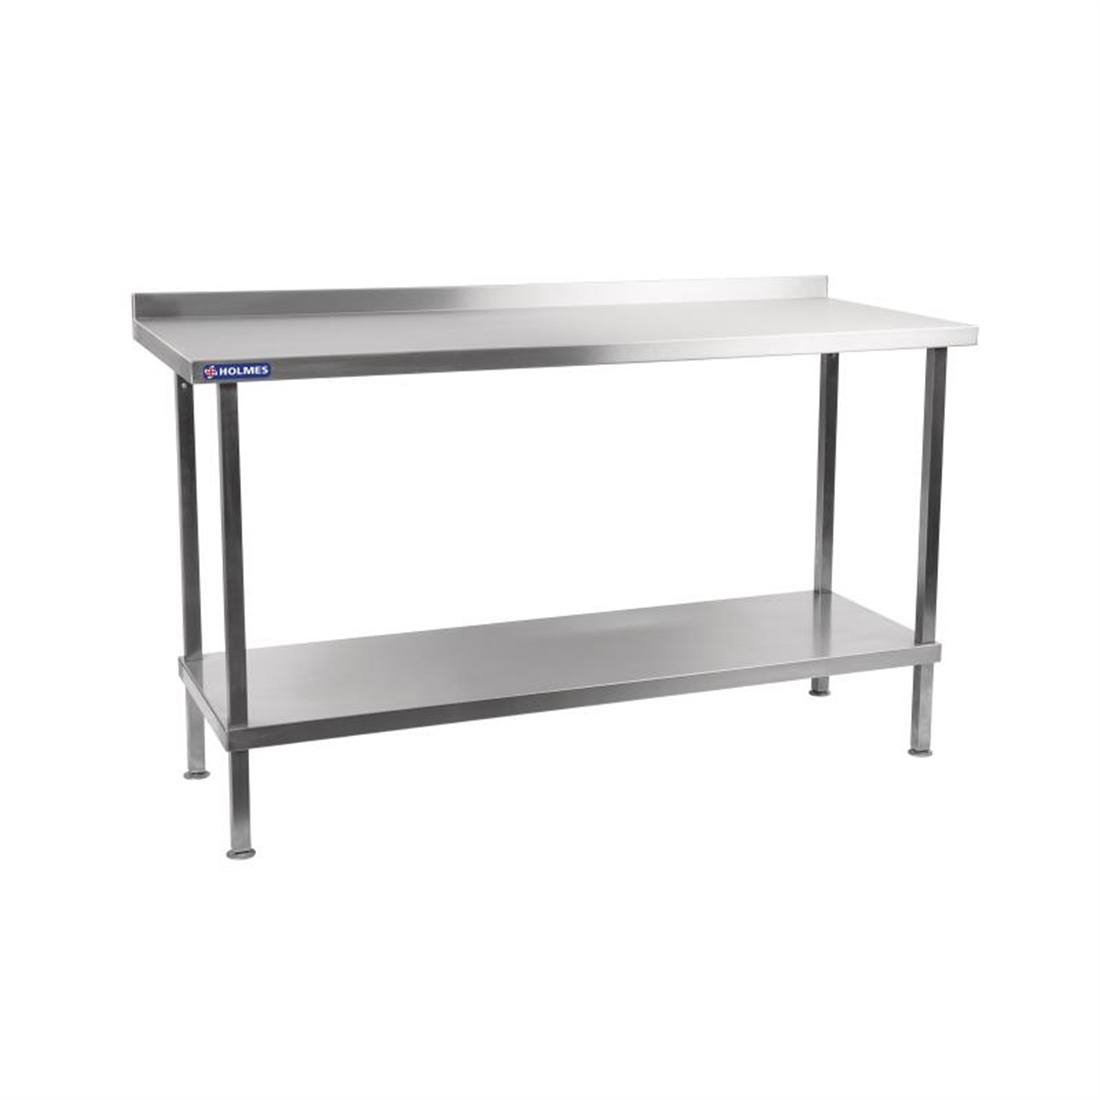 Holmes Self Assembly Stainless Steel Wall Table 1500mm